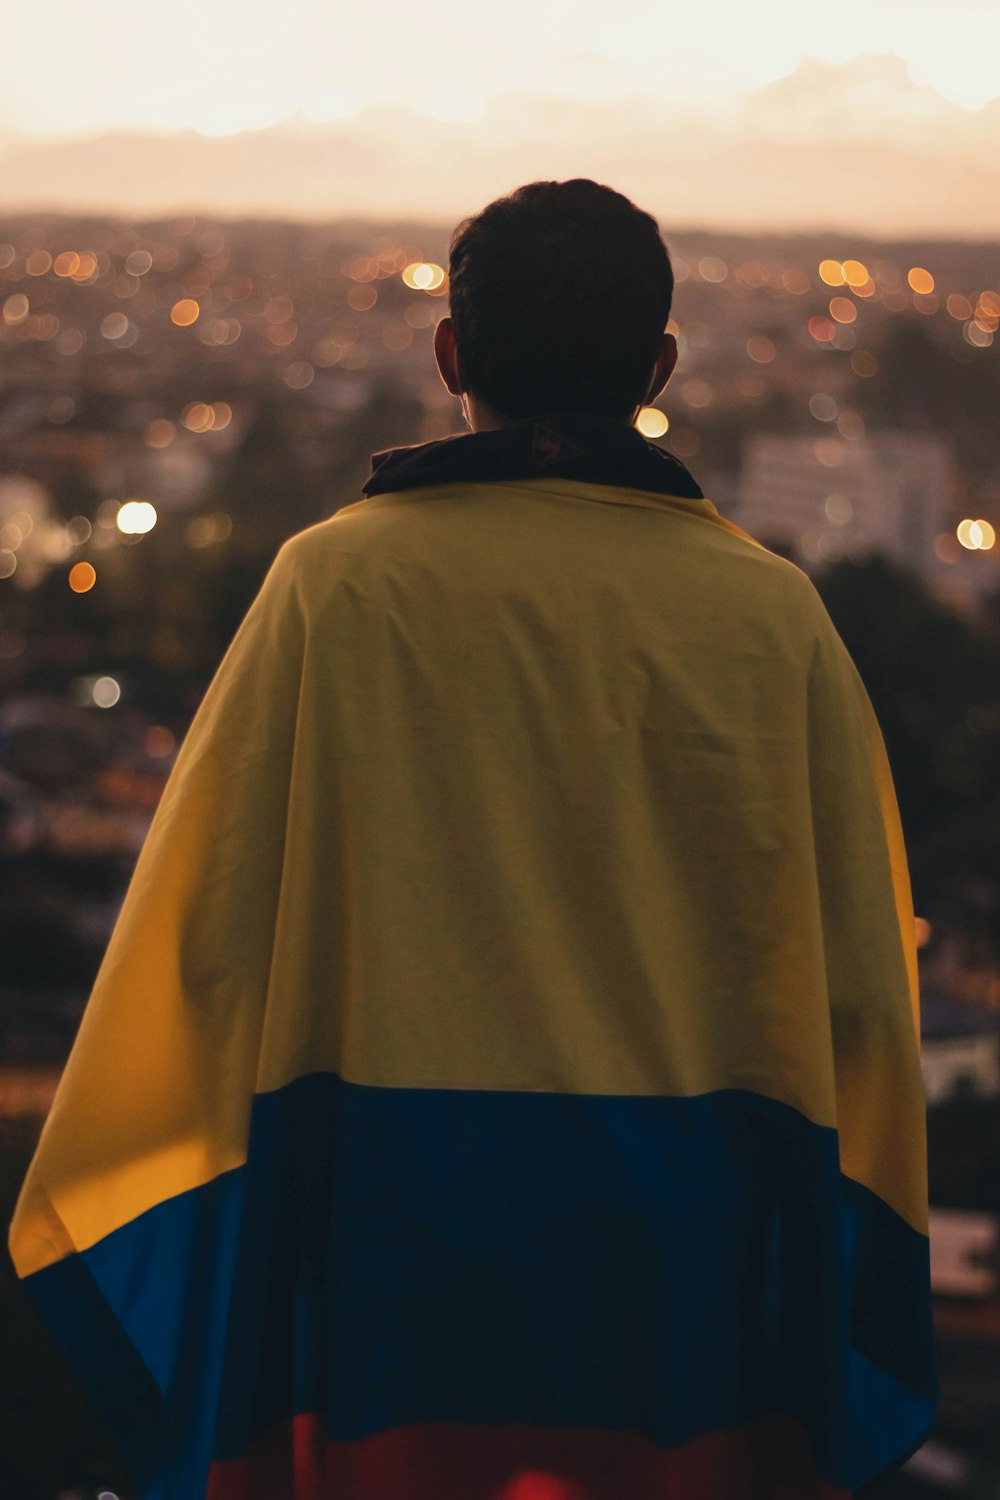 a man in a cape looking out over a city